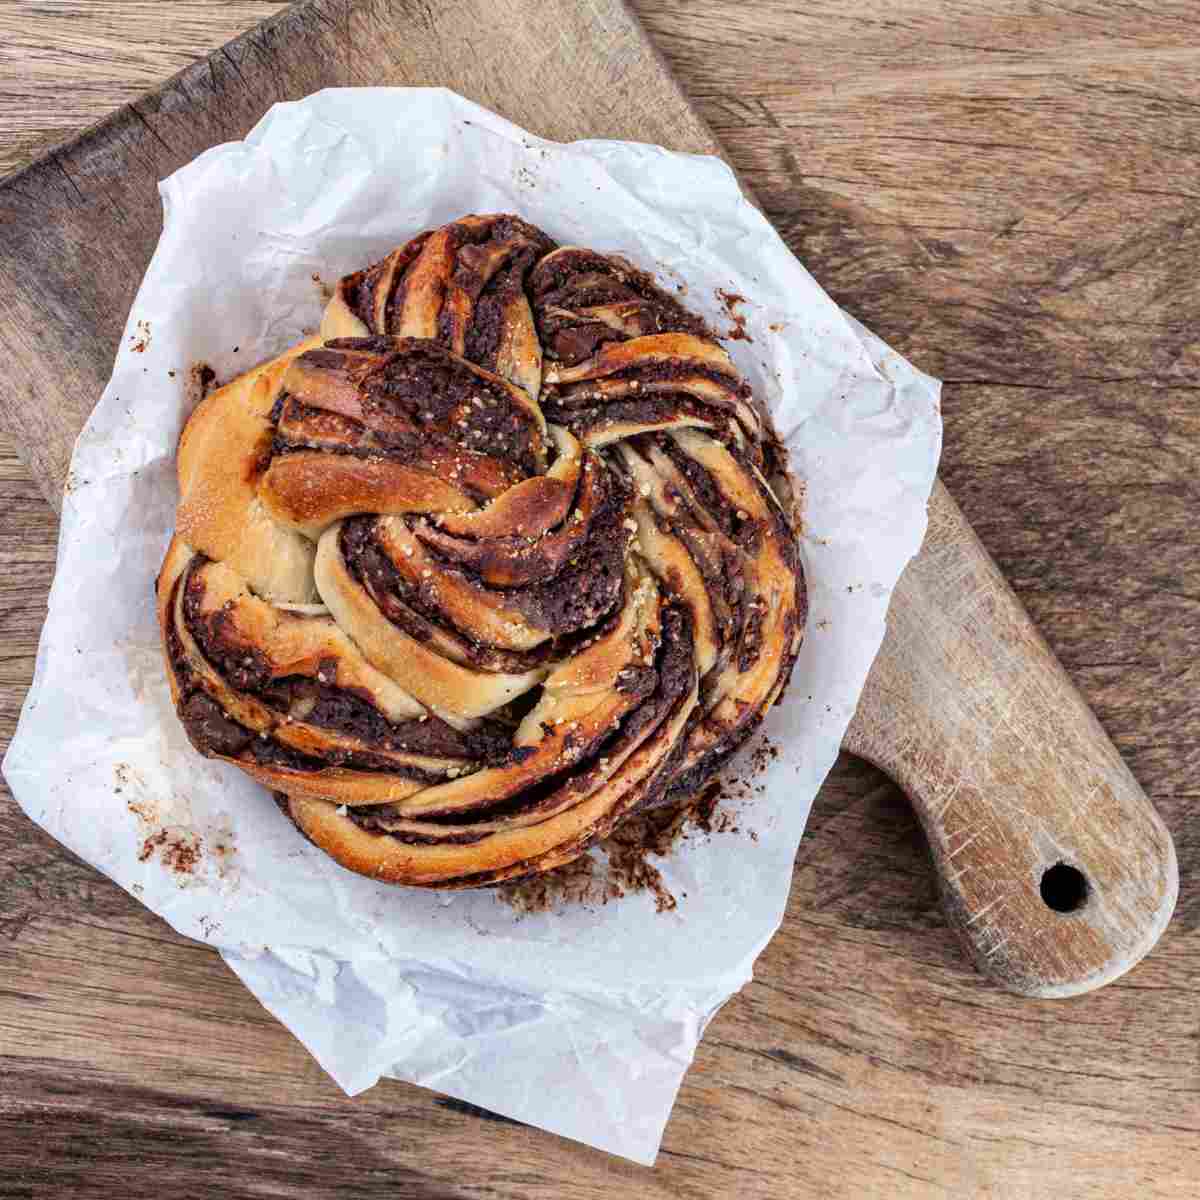 A handmade chocolate babka (Polish Easter bread) on parchment paper on top of a wooden cutting board.